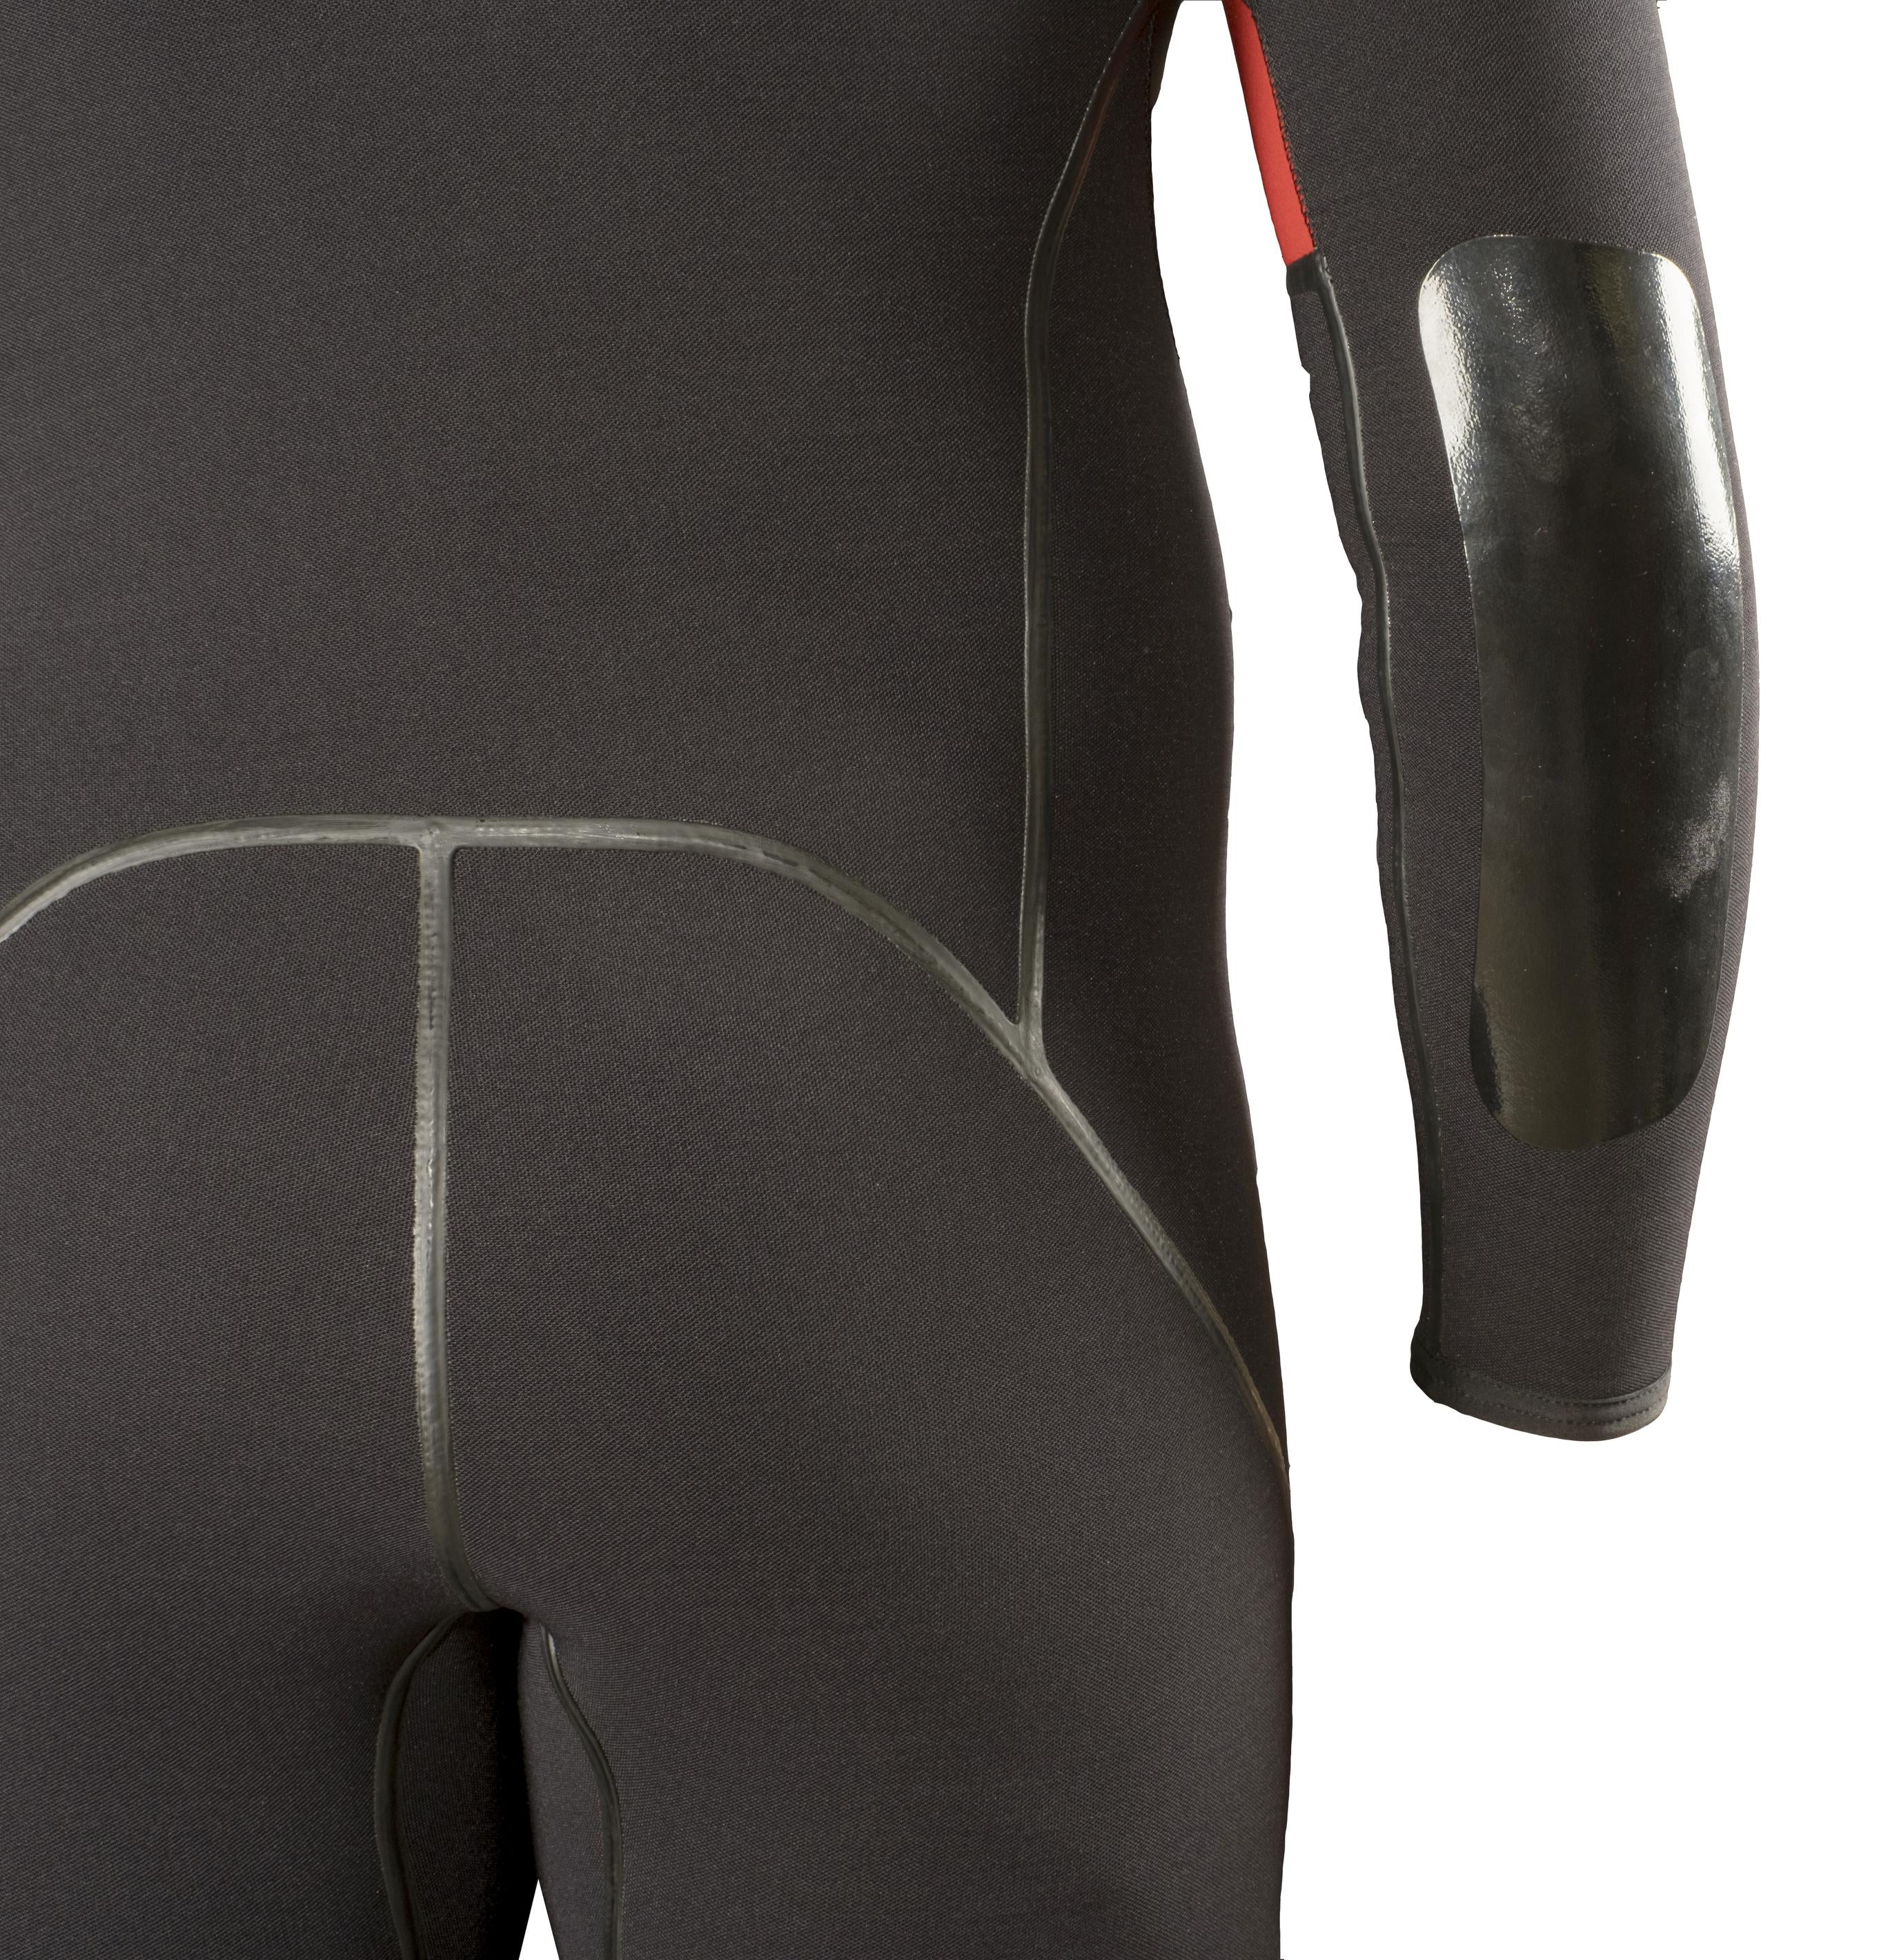 CANYON BALL Hooded Wetsuit